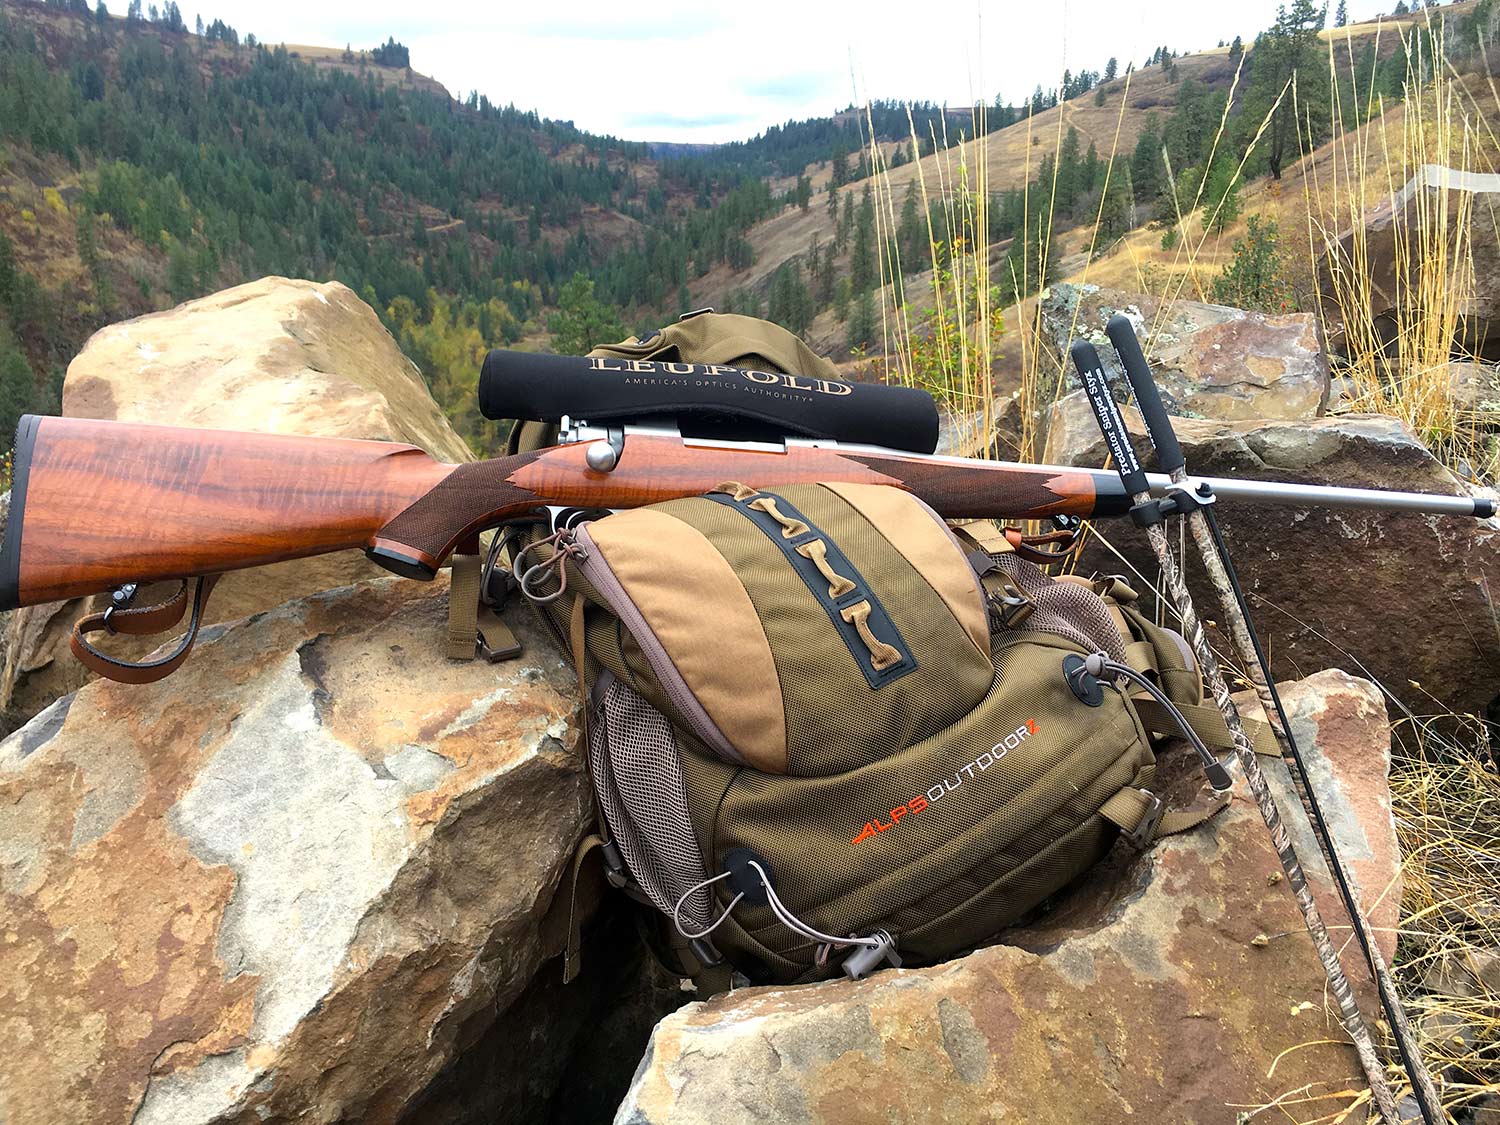 A backcountry hunting backpack and a rifle leaning on a pile of boulders.